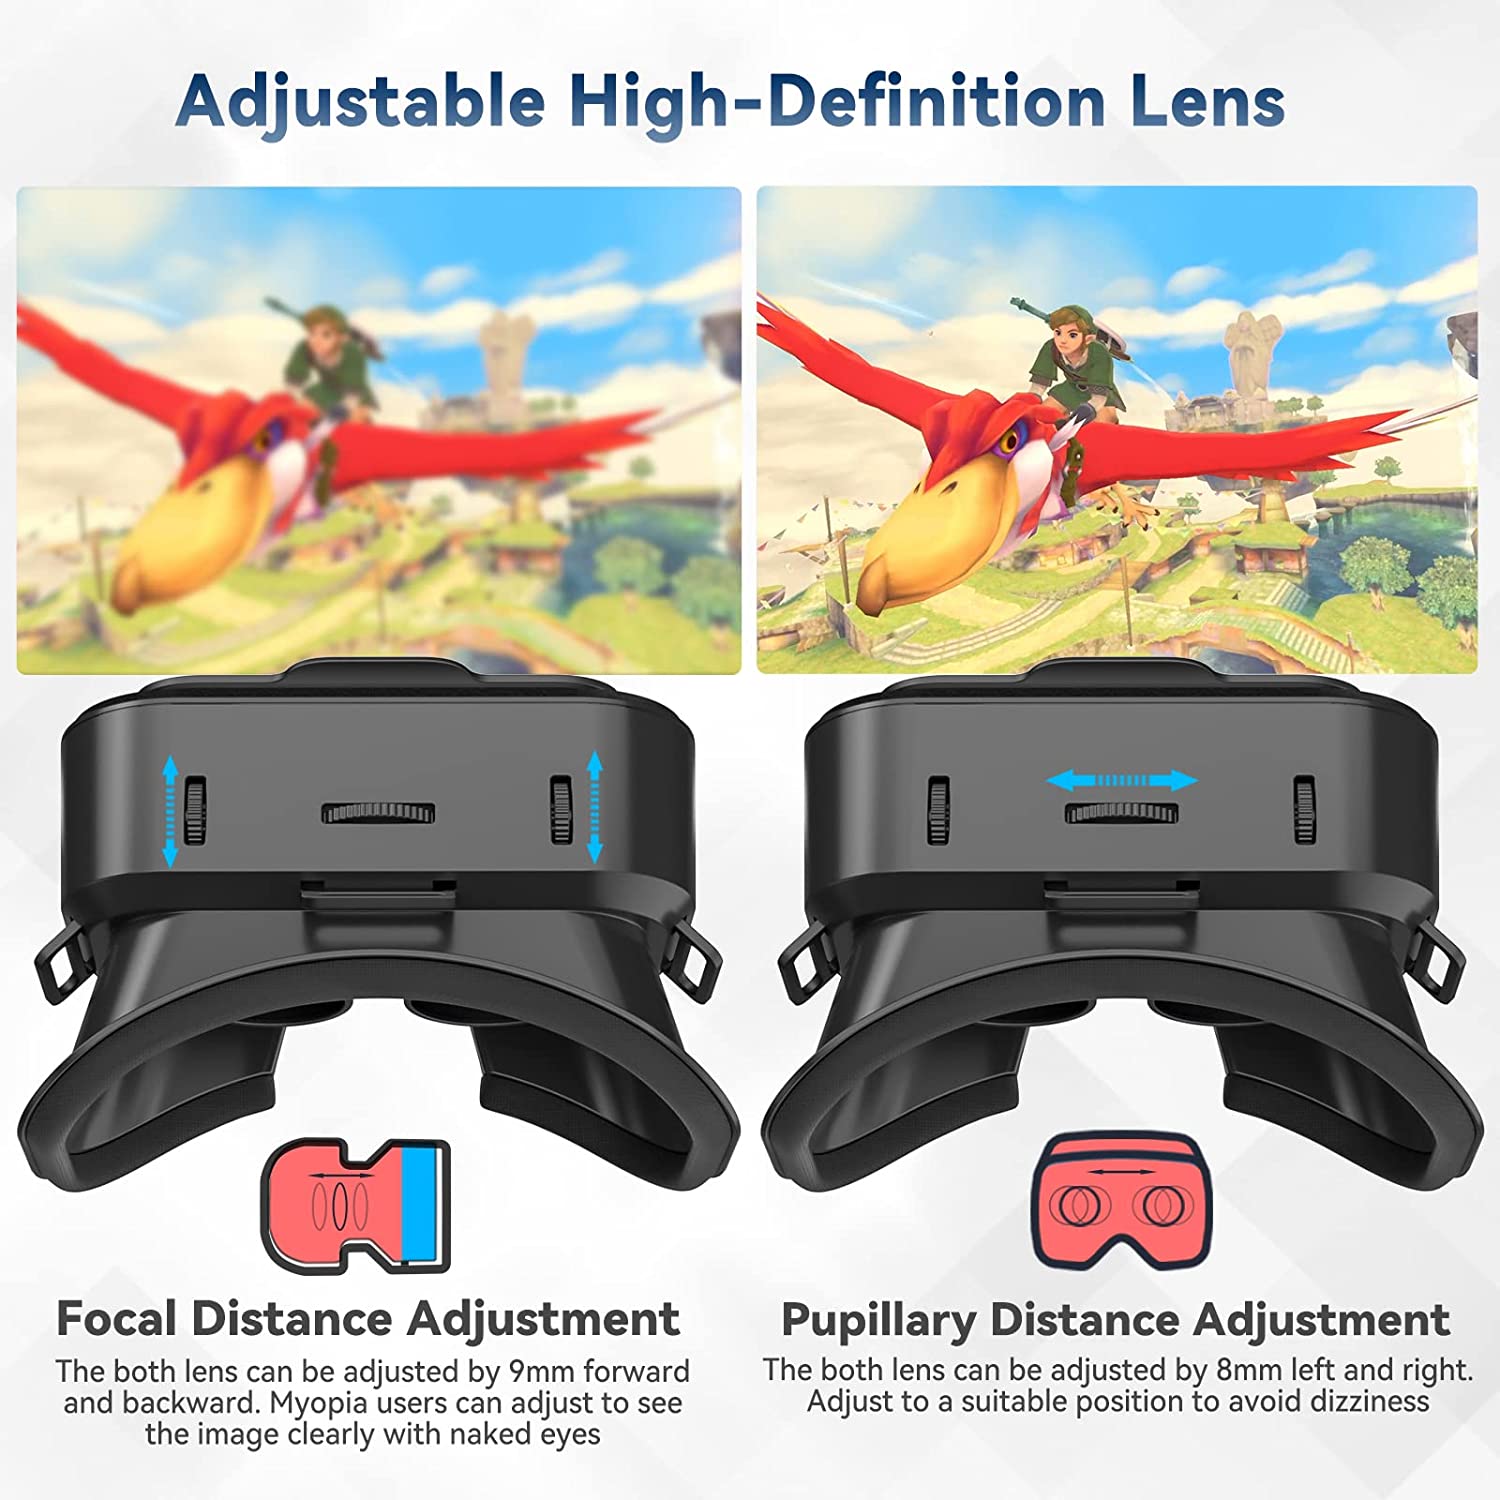 VR Headset Compatible with Nintendo Switch & Nintendo Switch OLED